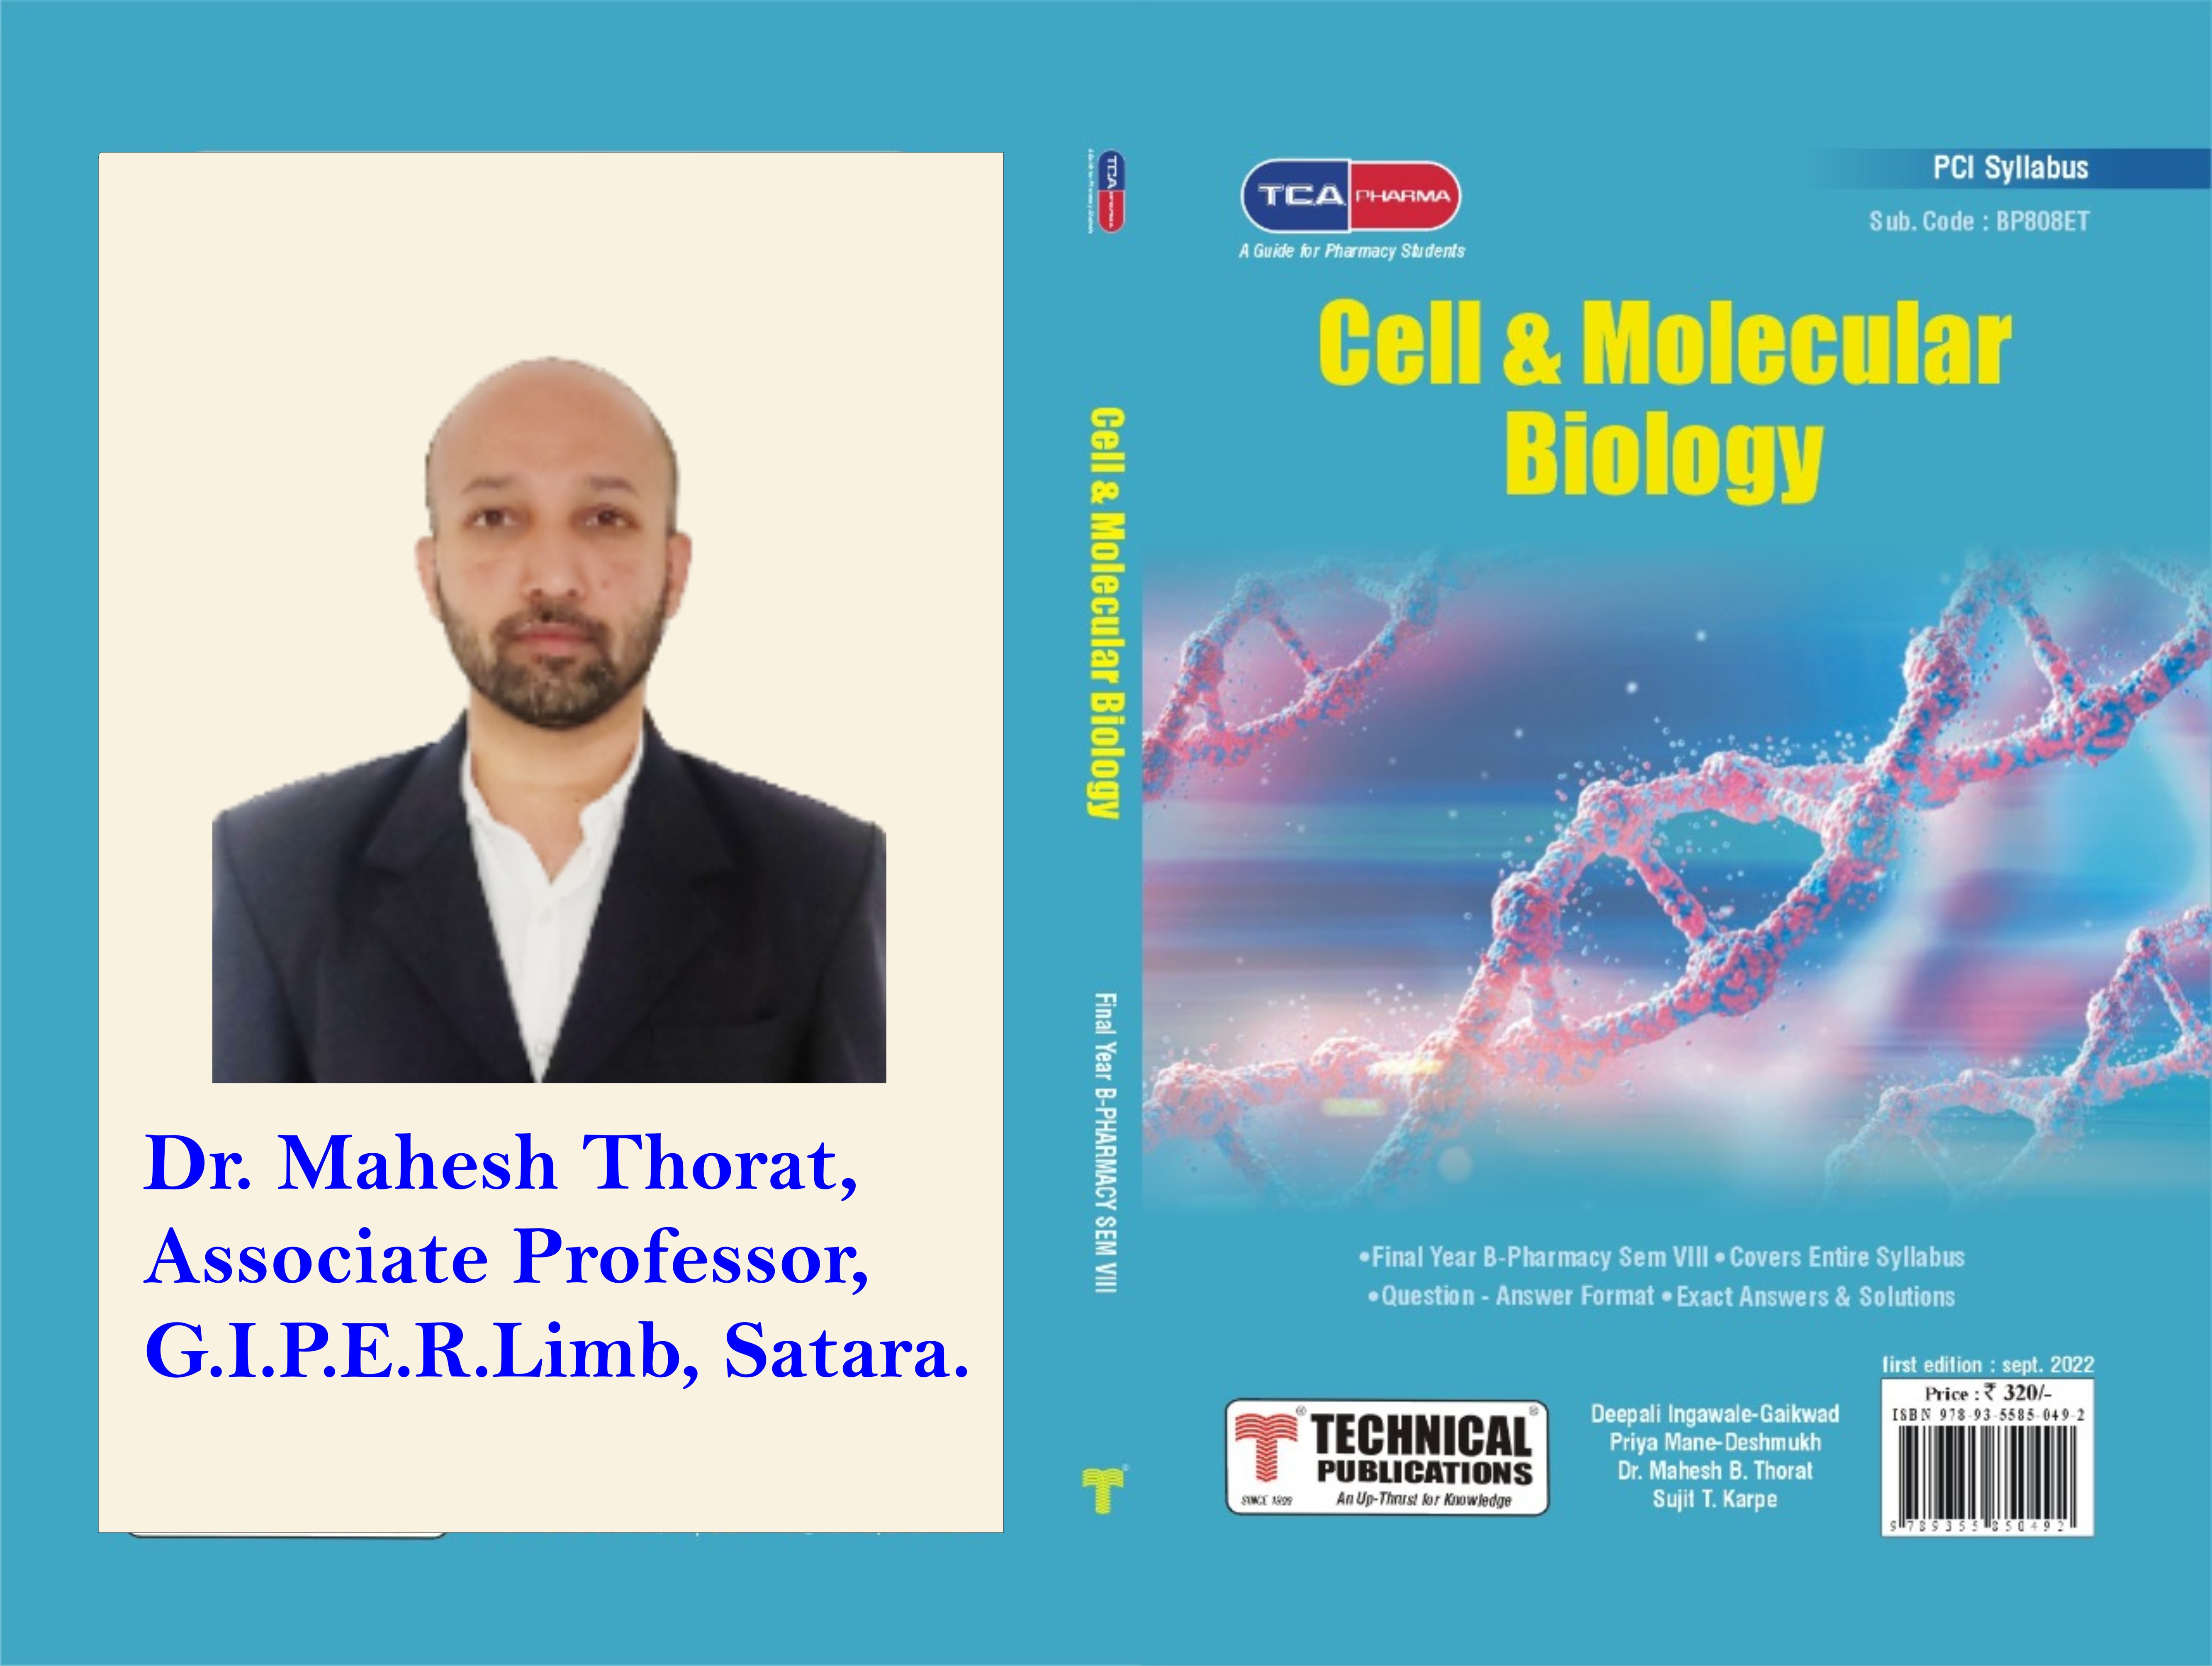 Book Published by Dr. Mahesh Thorat